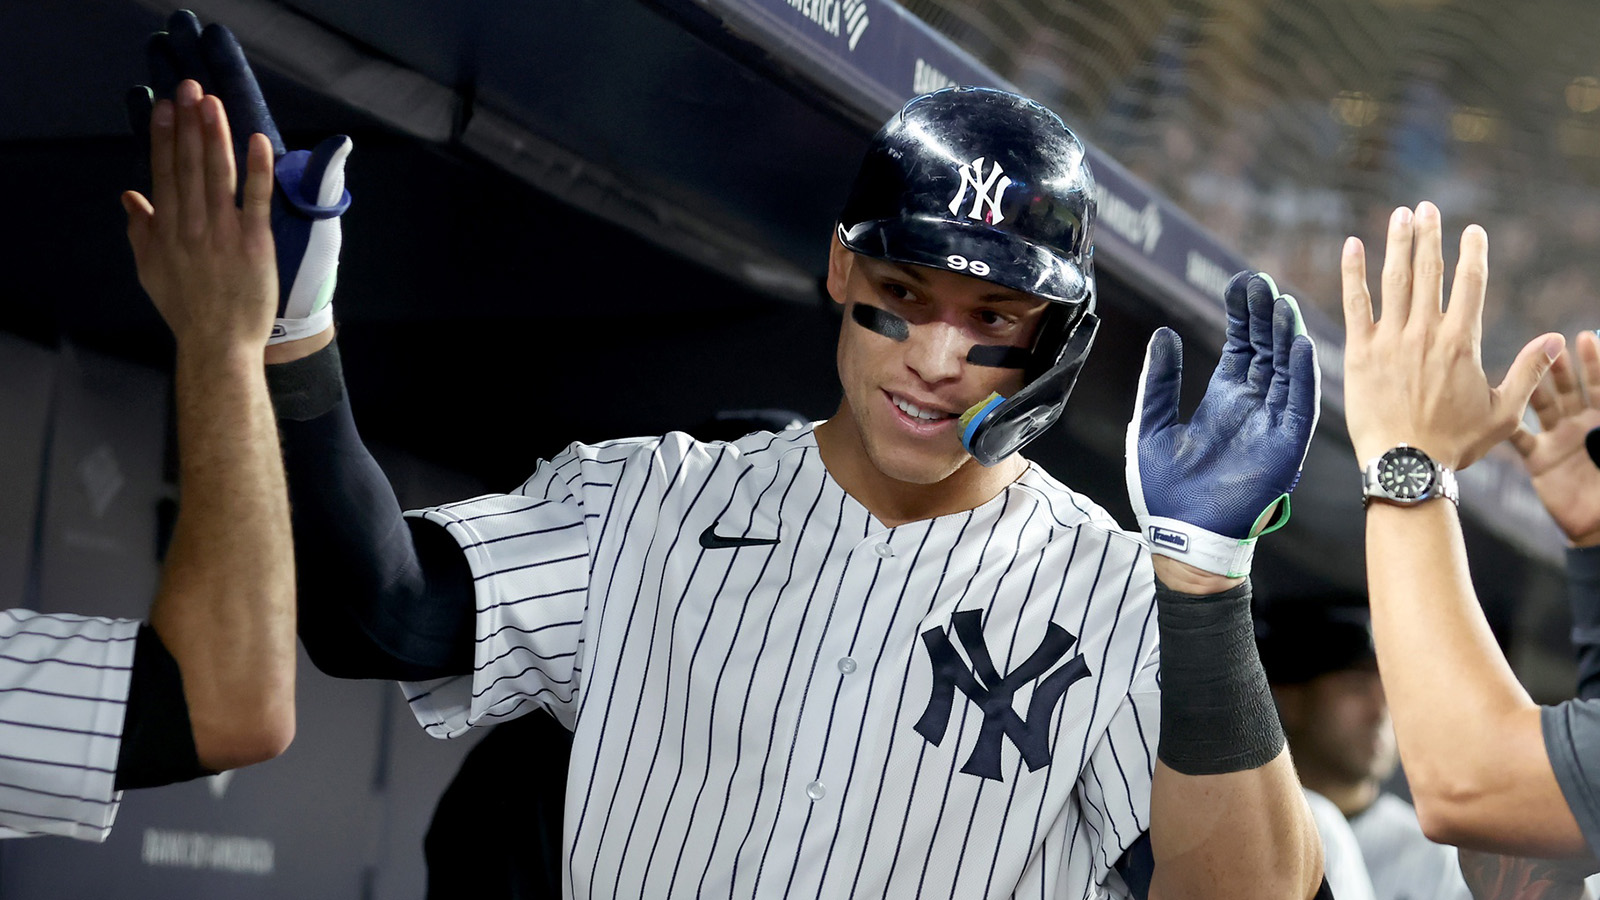 With Aaron Judge's HR No. 61, what's his 2017 rookie card value